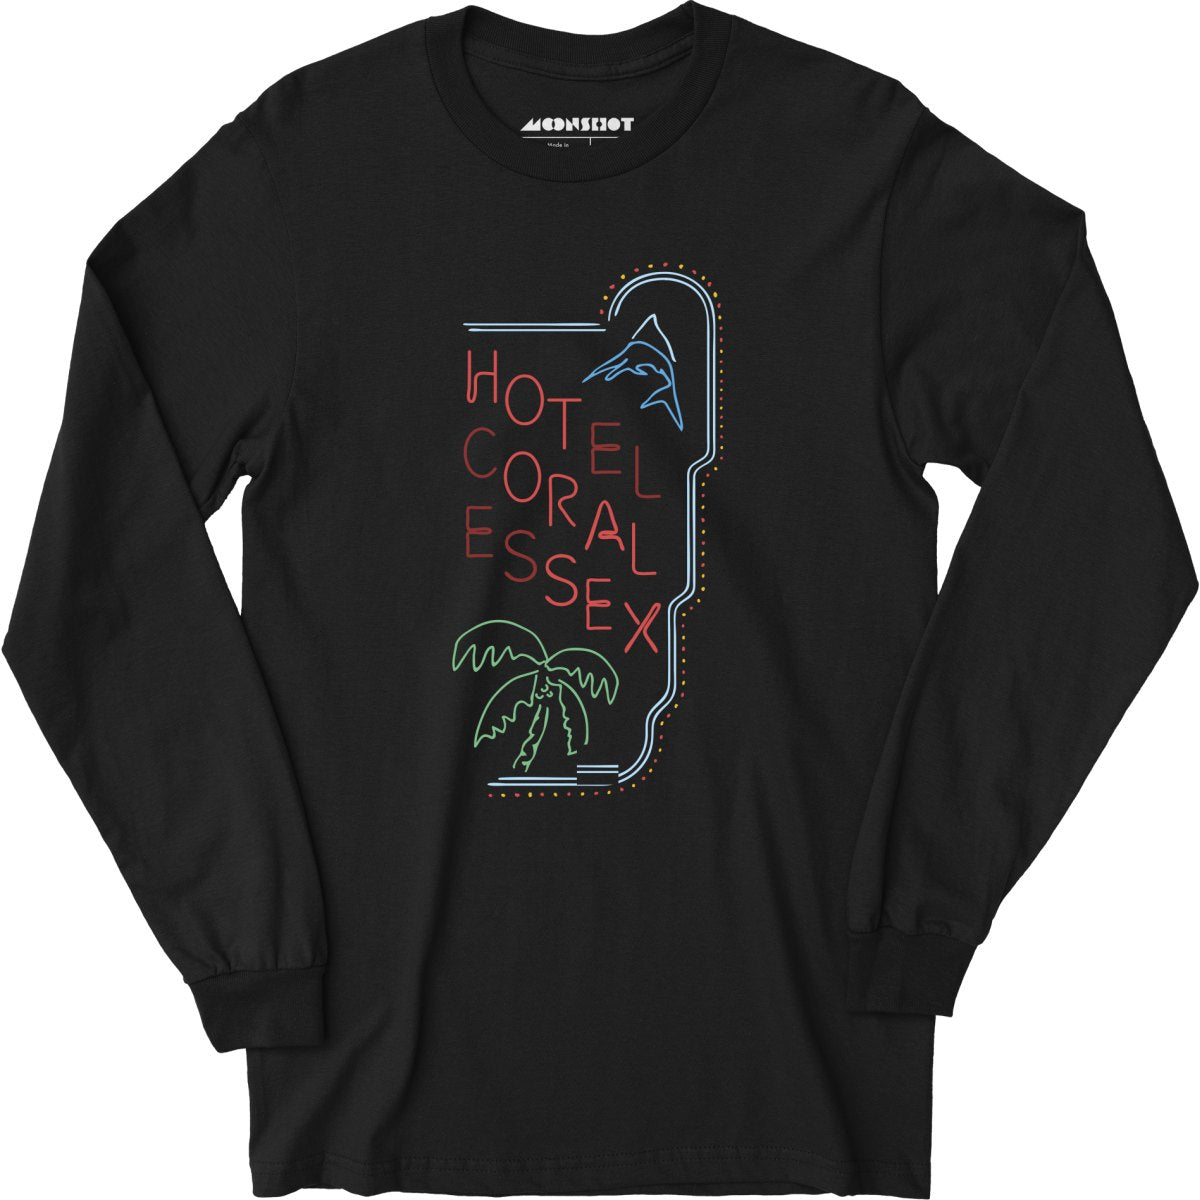 Hotel Coral Essex - Long Sleeve T-Shirt